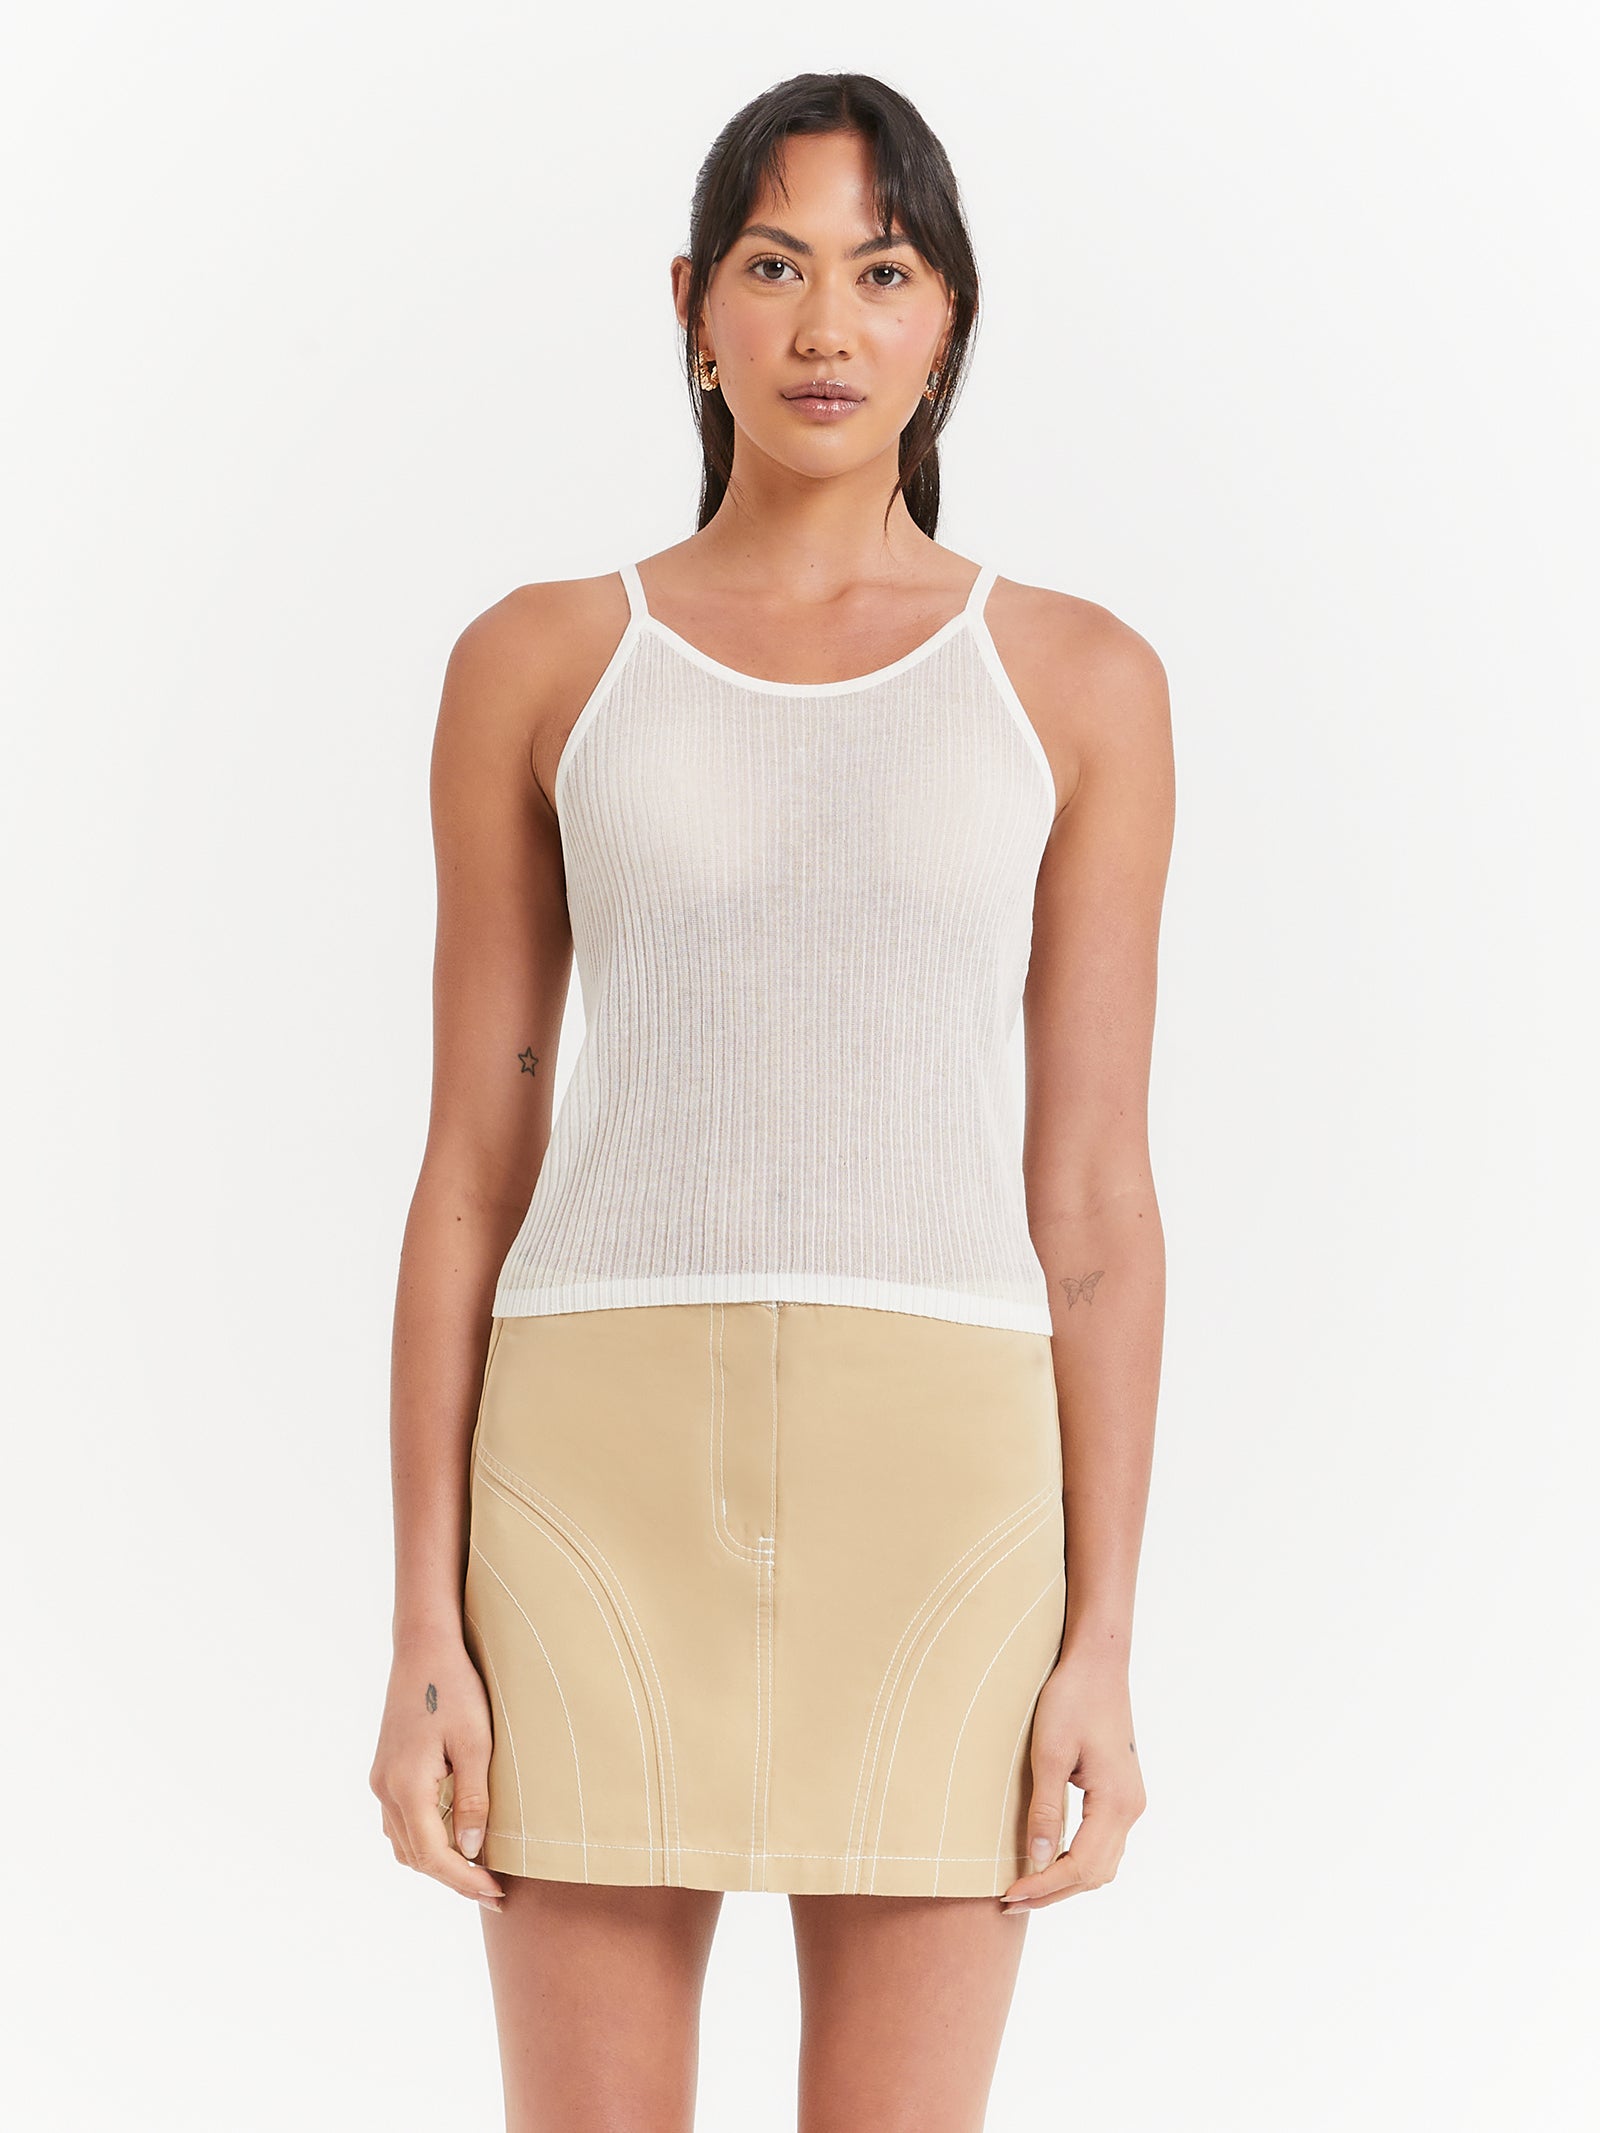 Adelaide Sheer Tank Top in Off-White - Glue Store